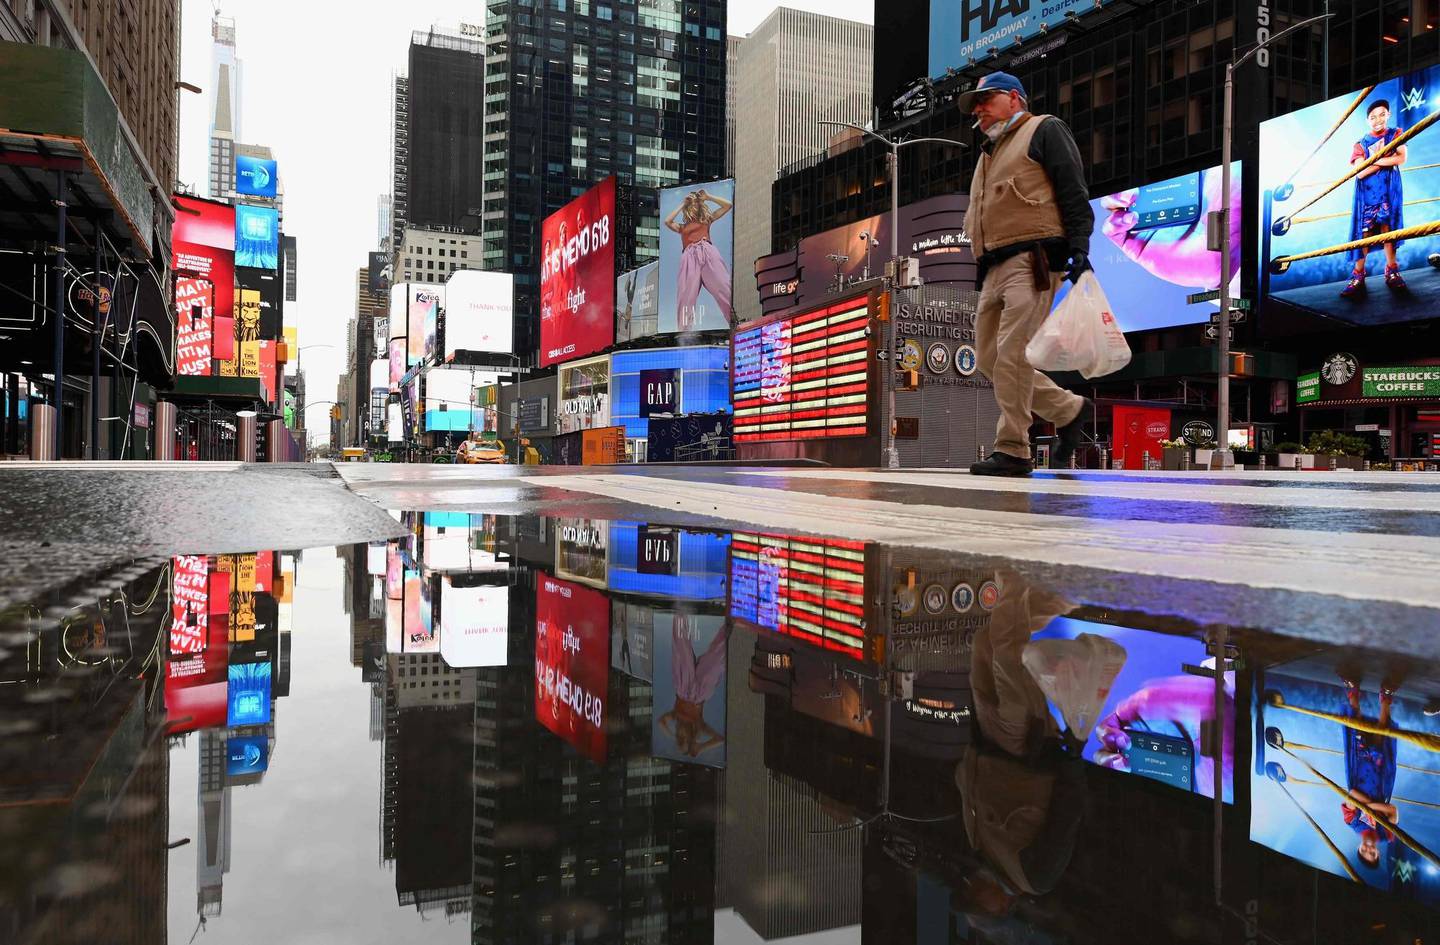 A man crosses the street at a nearly empty Time Square on April 09, 2020 in New York City. - Another 6.6 million US workers file for unemployment benefits for the week ending April 4, 2020, the Labor Department said on April 9, 2020, a slight decrease from the previous week's count of 6.9 million, which was 219,000 more than the original tally, according to the report. Nearly 17 million workers lost their jobs since mid-March, as the coronavirus pandemic continues to affect the economy. (Photo by Angela Weiss / AFP)